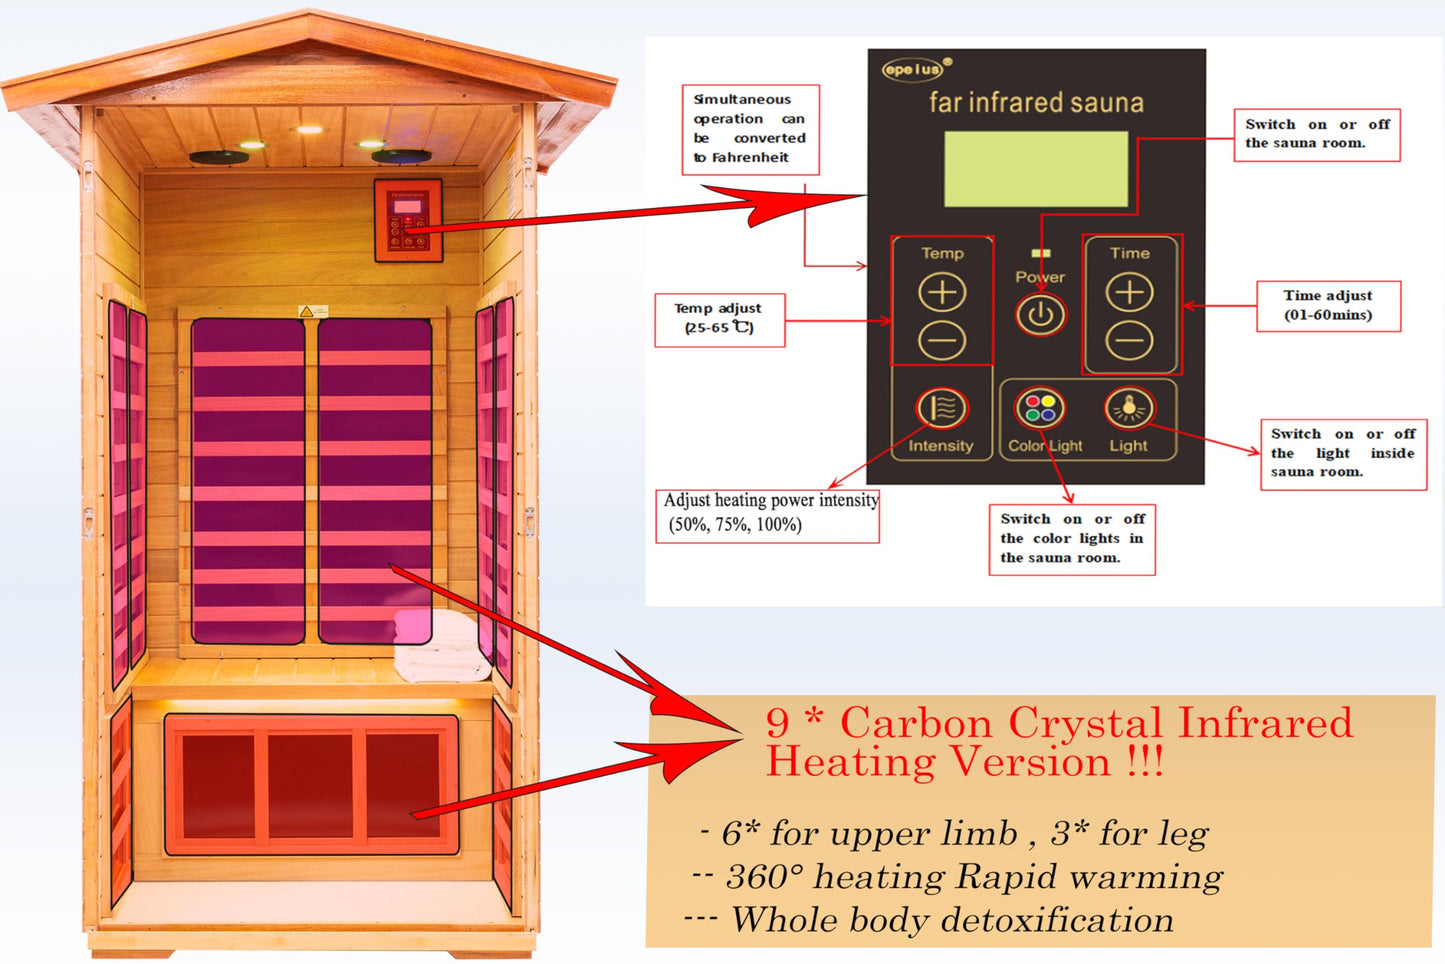 LTCCDSS Red Cedar Outdoor Sauna 1 Person, Low EMF Far Infrared Sauna for Home, Withstand Outdoor Temp -10℉-149℉| EMF Readings Below 0.5mG, 9 Low EMF Boards-Chromotherapy-Bluetooth Speaker